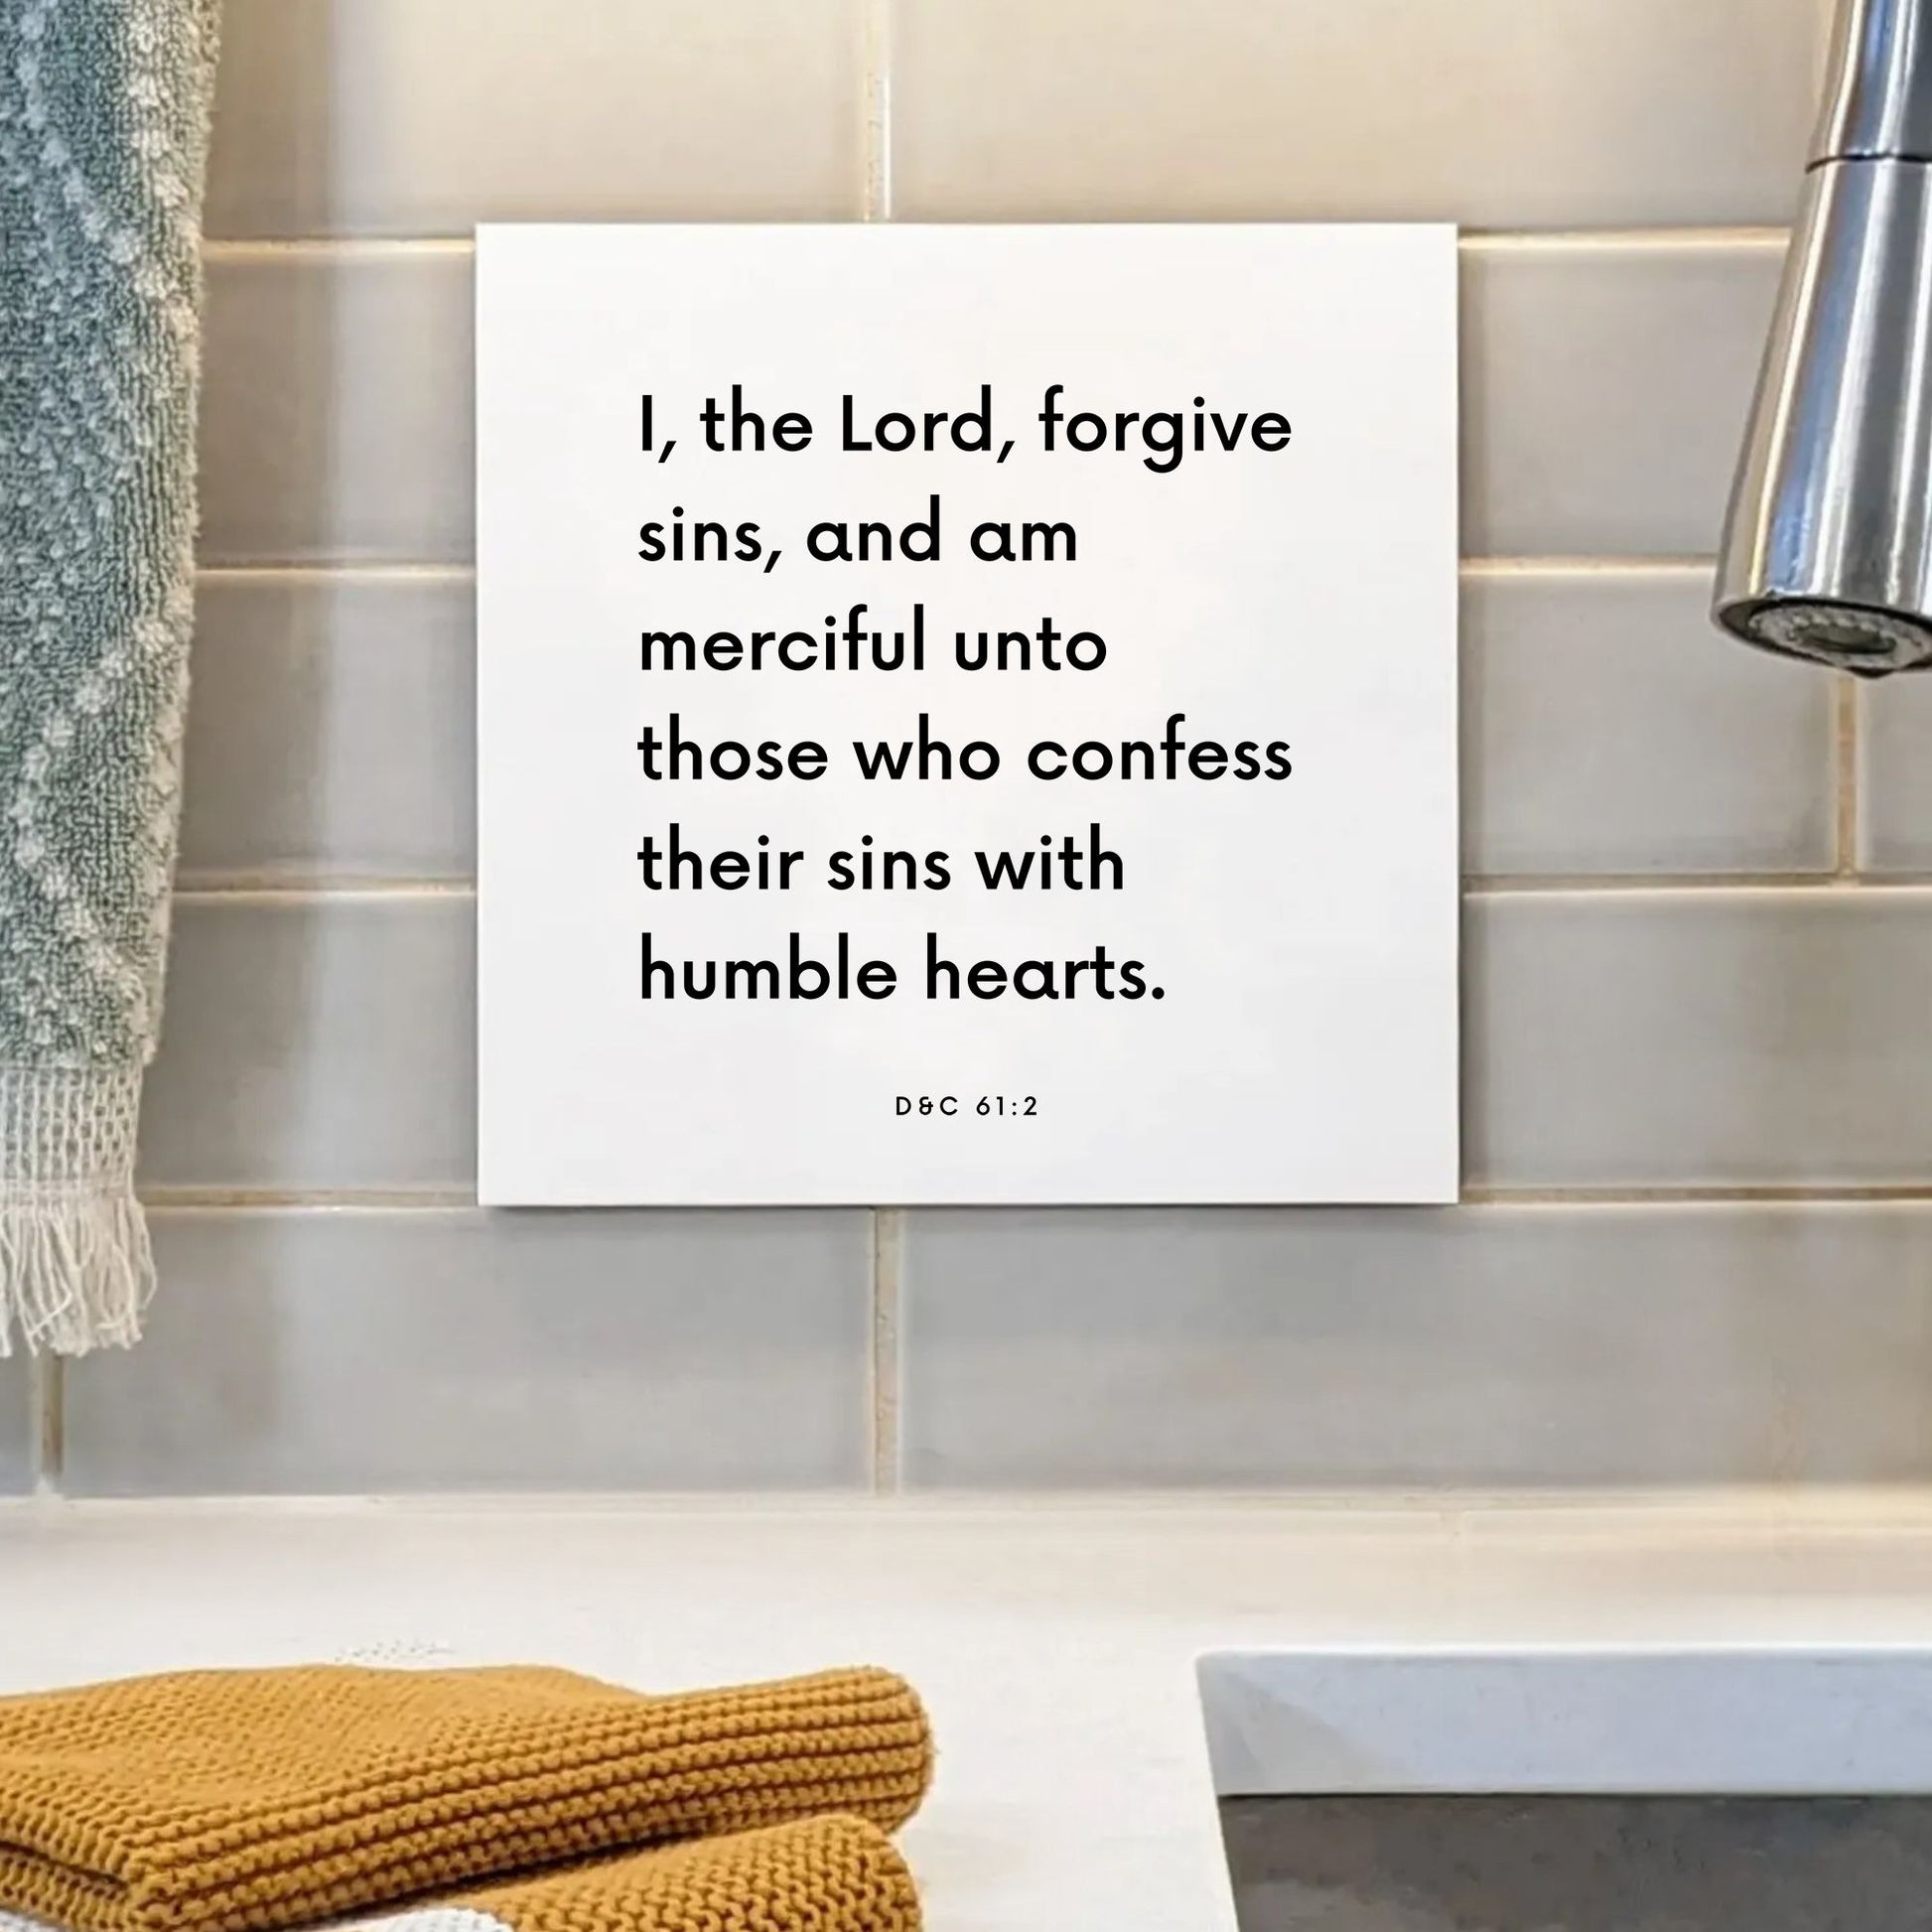 Sink mouting of the scripture tile for D&C 61:2 - "I, the Lord, forgive sins, and am merciful"